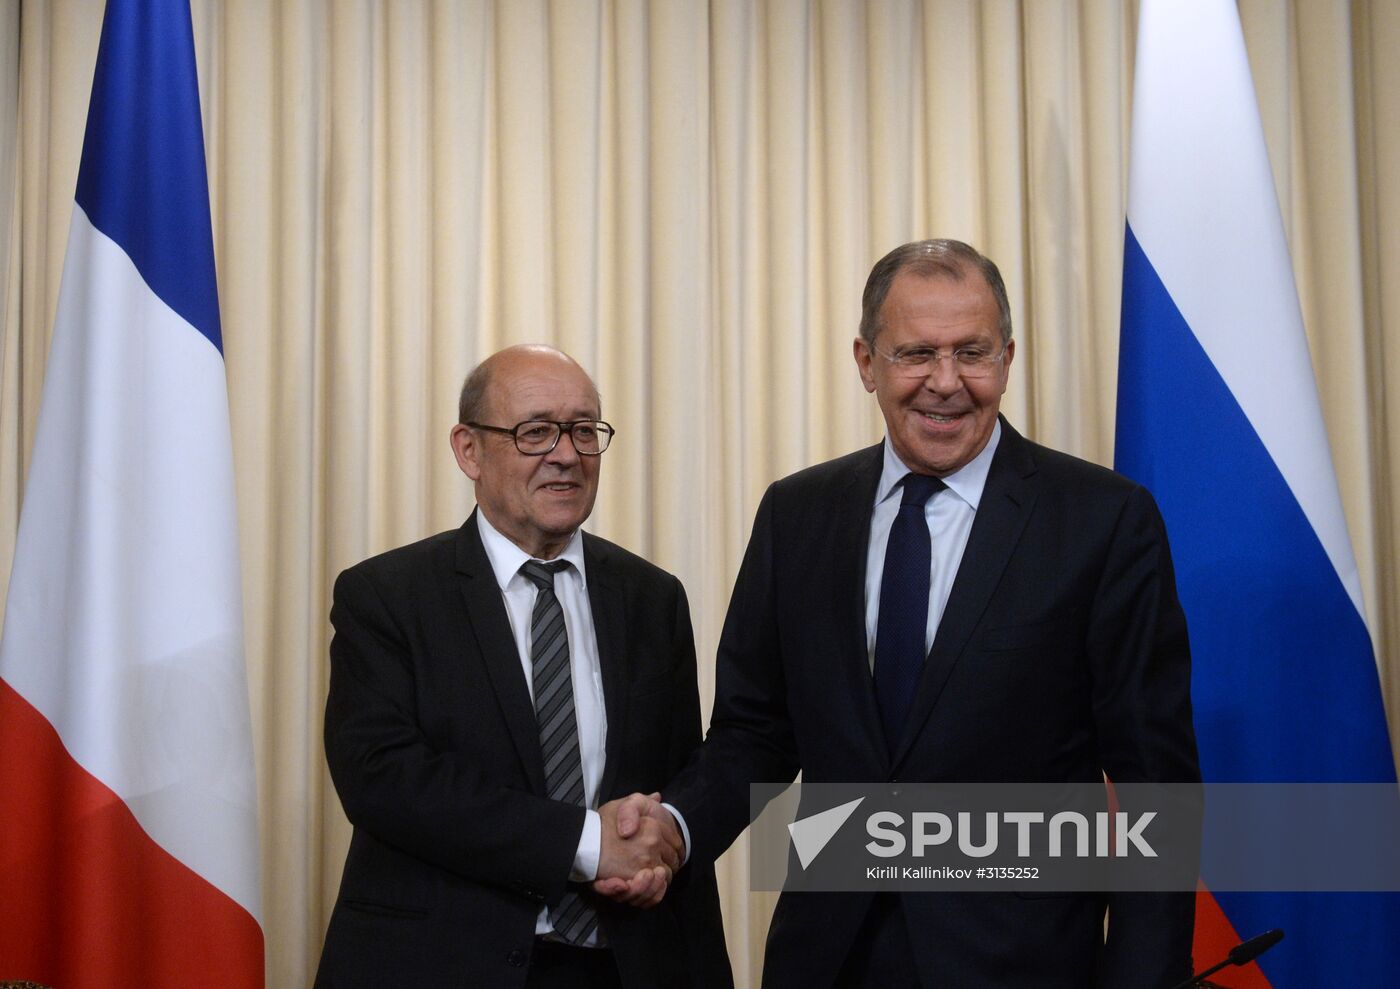 Foreign Ministers of Russia, France meet in Moscow